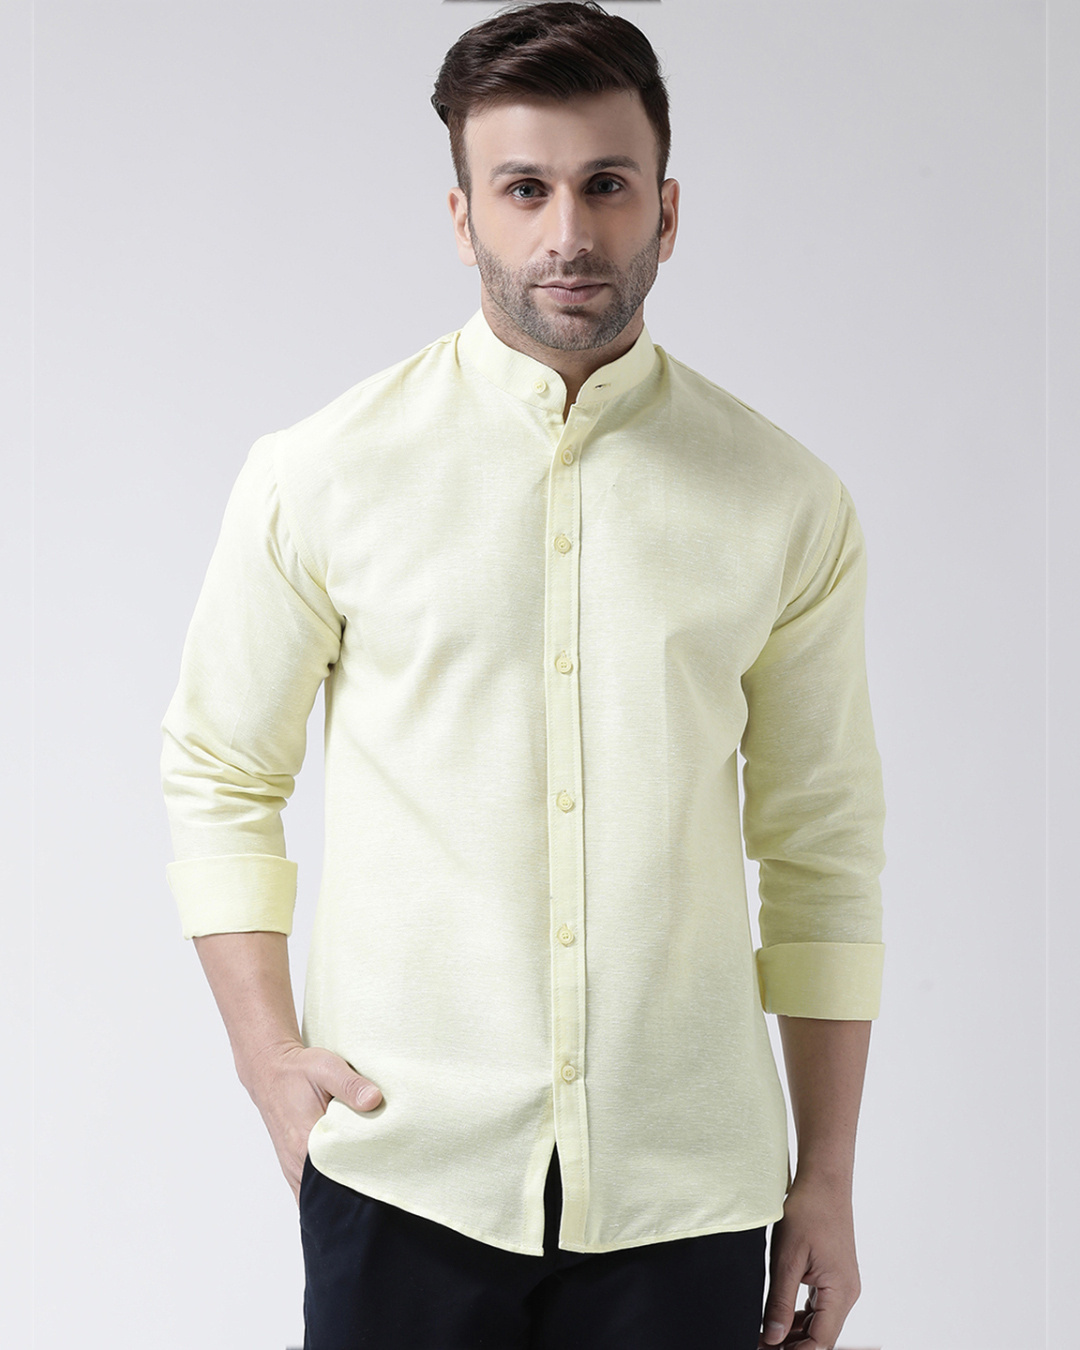 Buy Riag Full Sleeves Cotton Casual Chinese Neck Shirt for Men Yellow ...